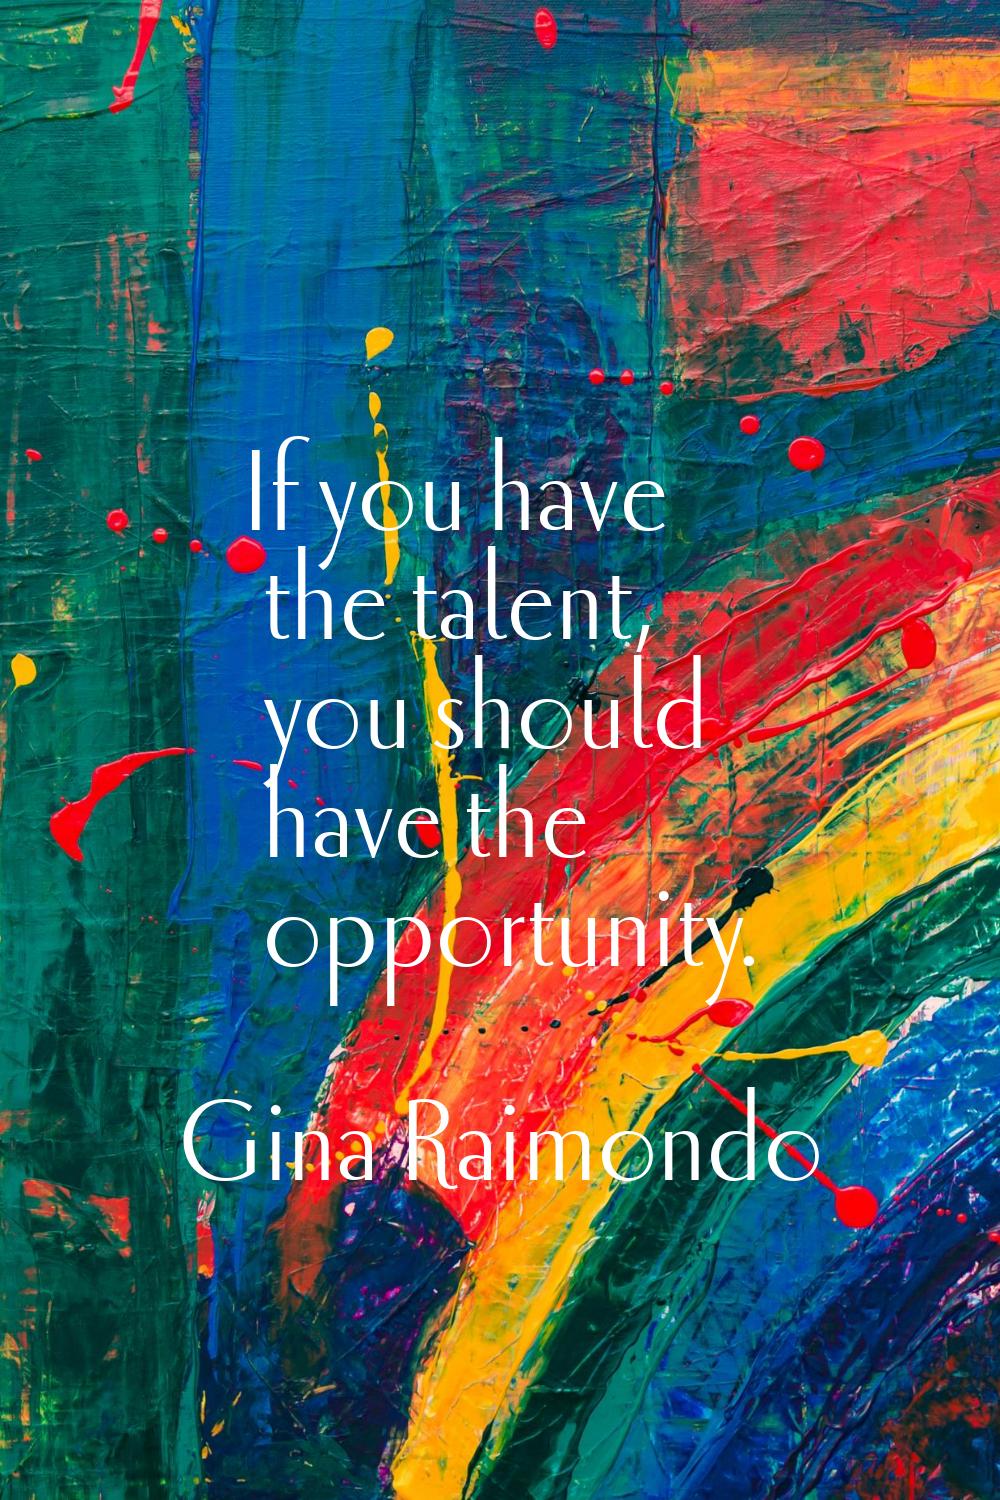 If you have the talent, you should have the opportunity.